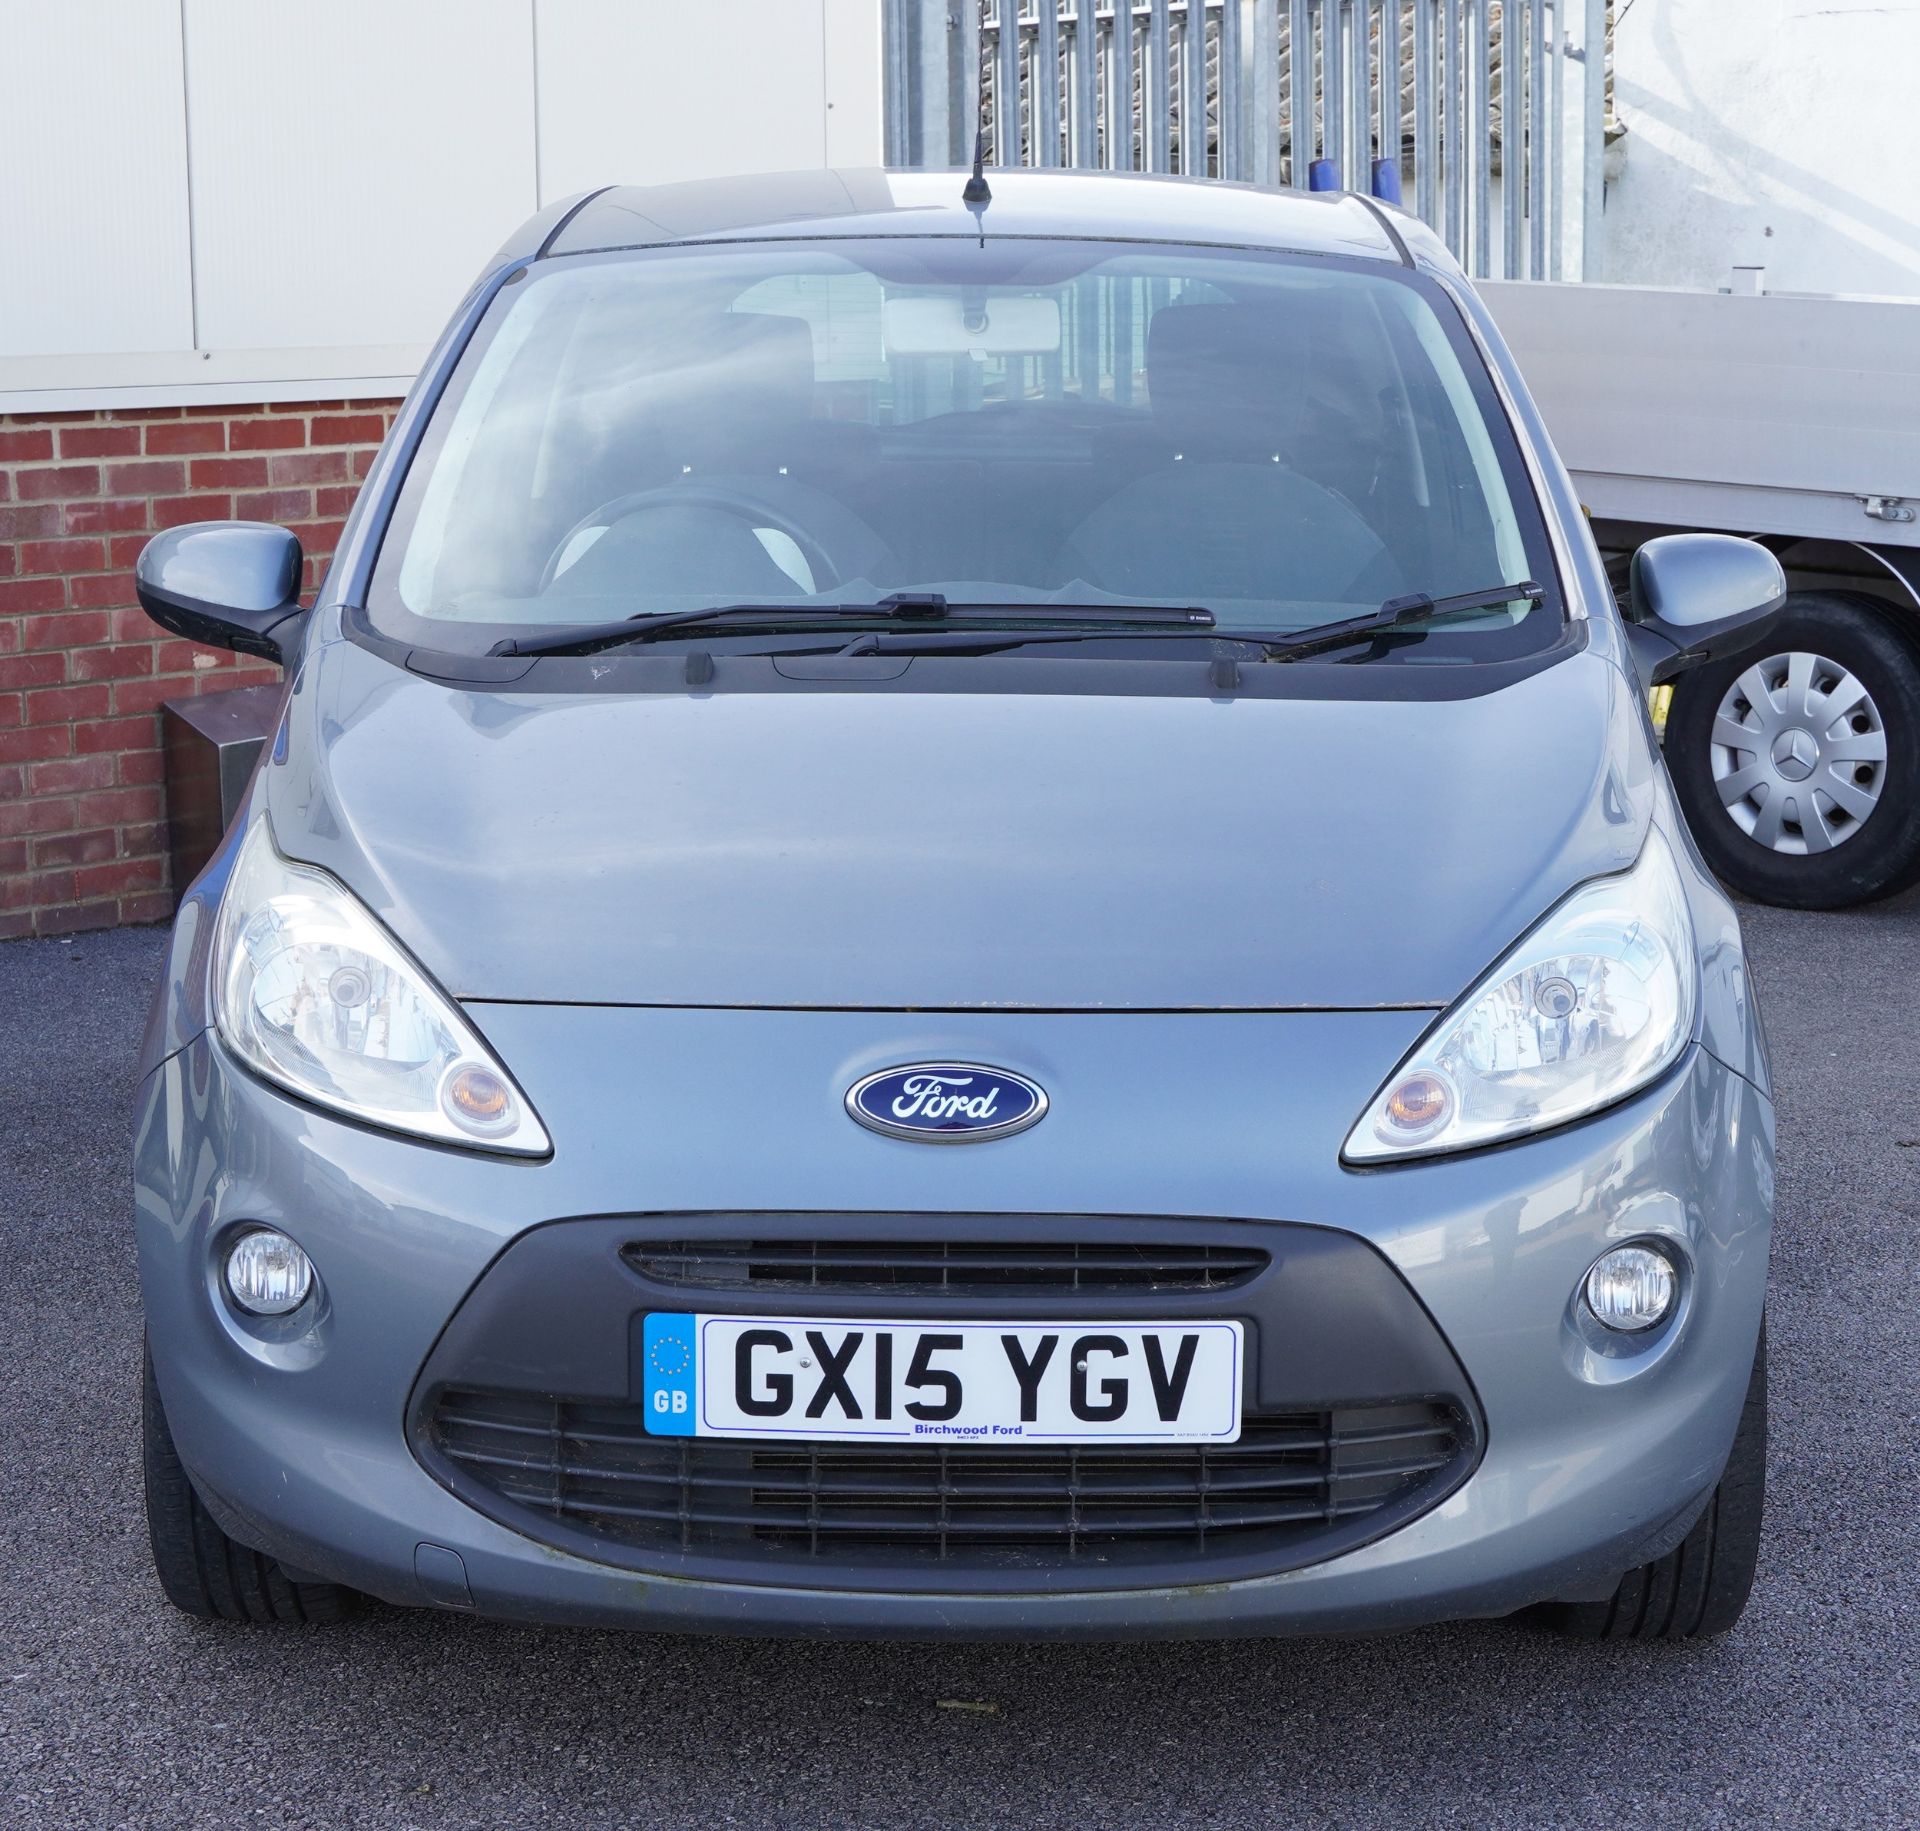 2015 manual Ford KA Zetec. 1.2 petrol three door hatchback, Reg GX15 YGV, One owner from new, 7434 - Image 4 of 15